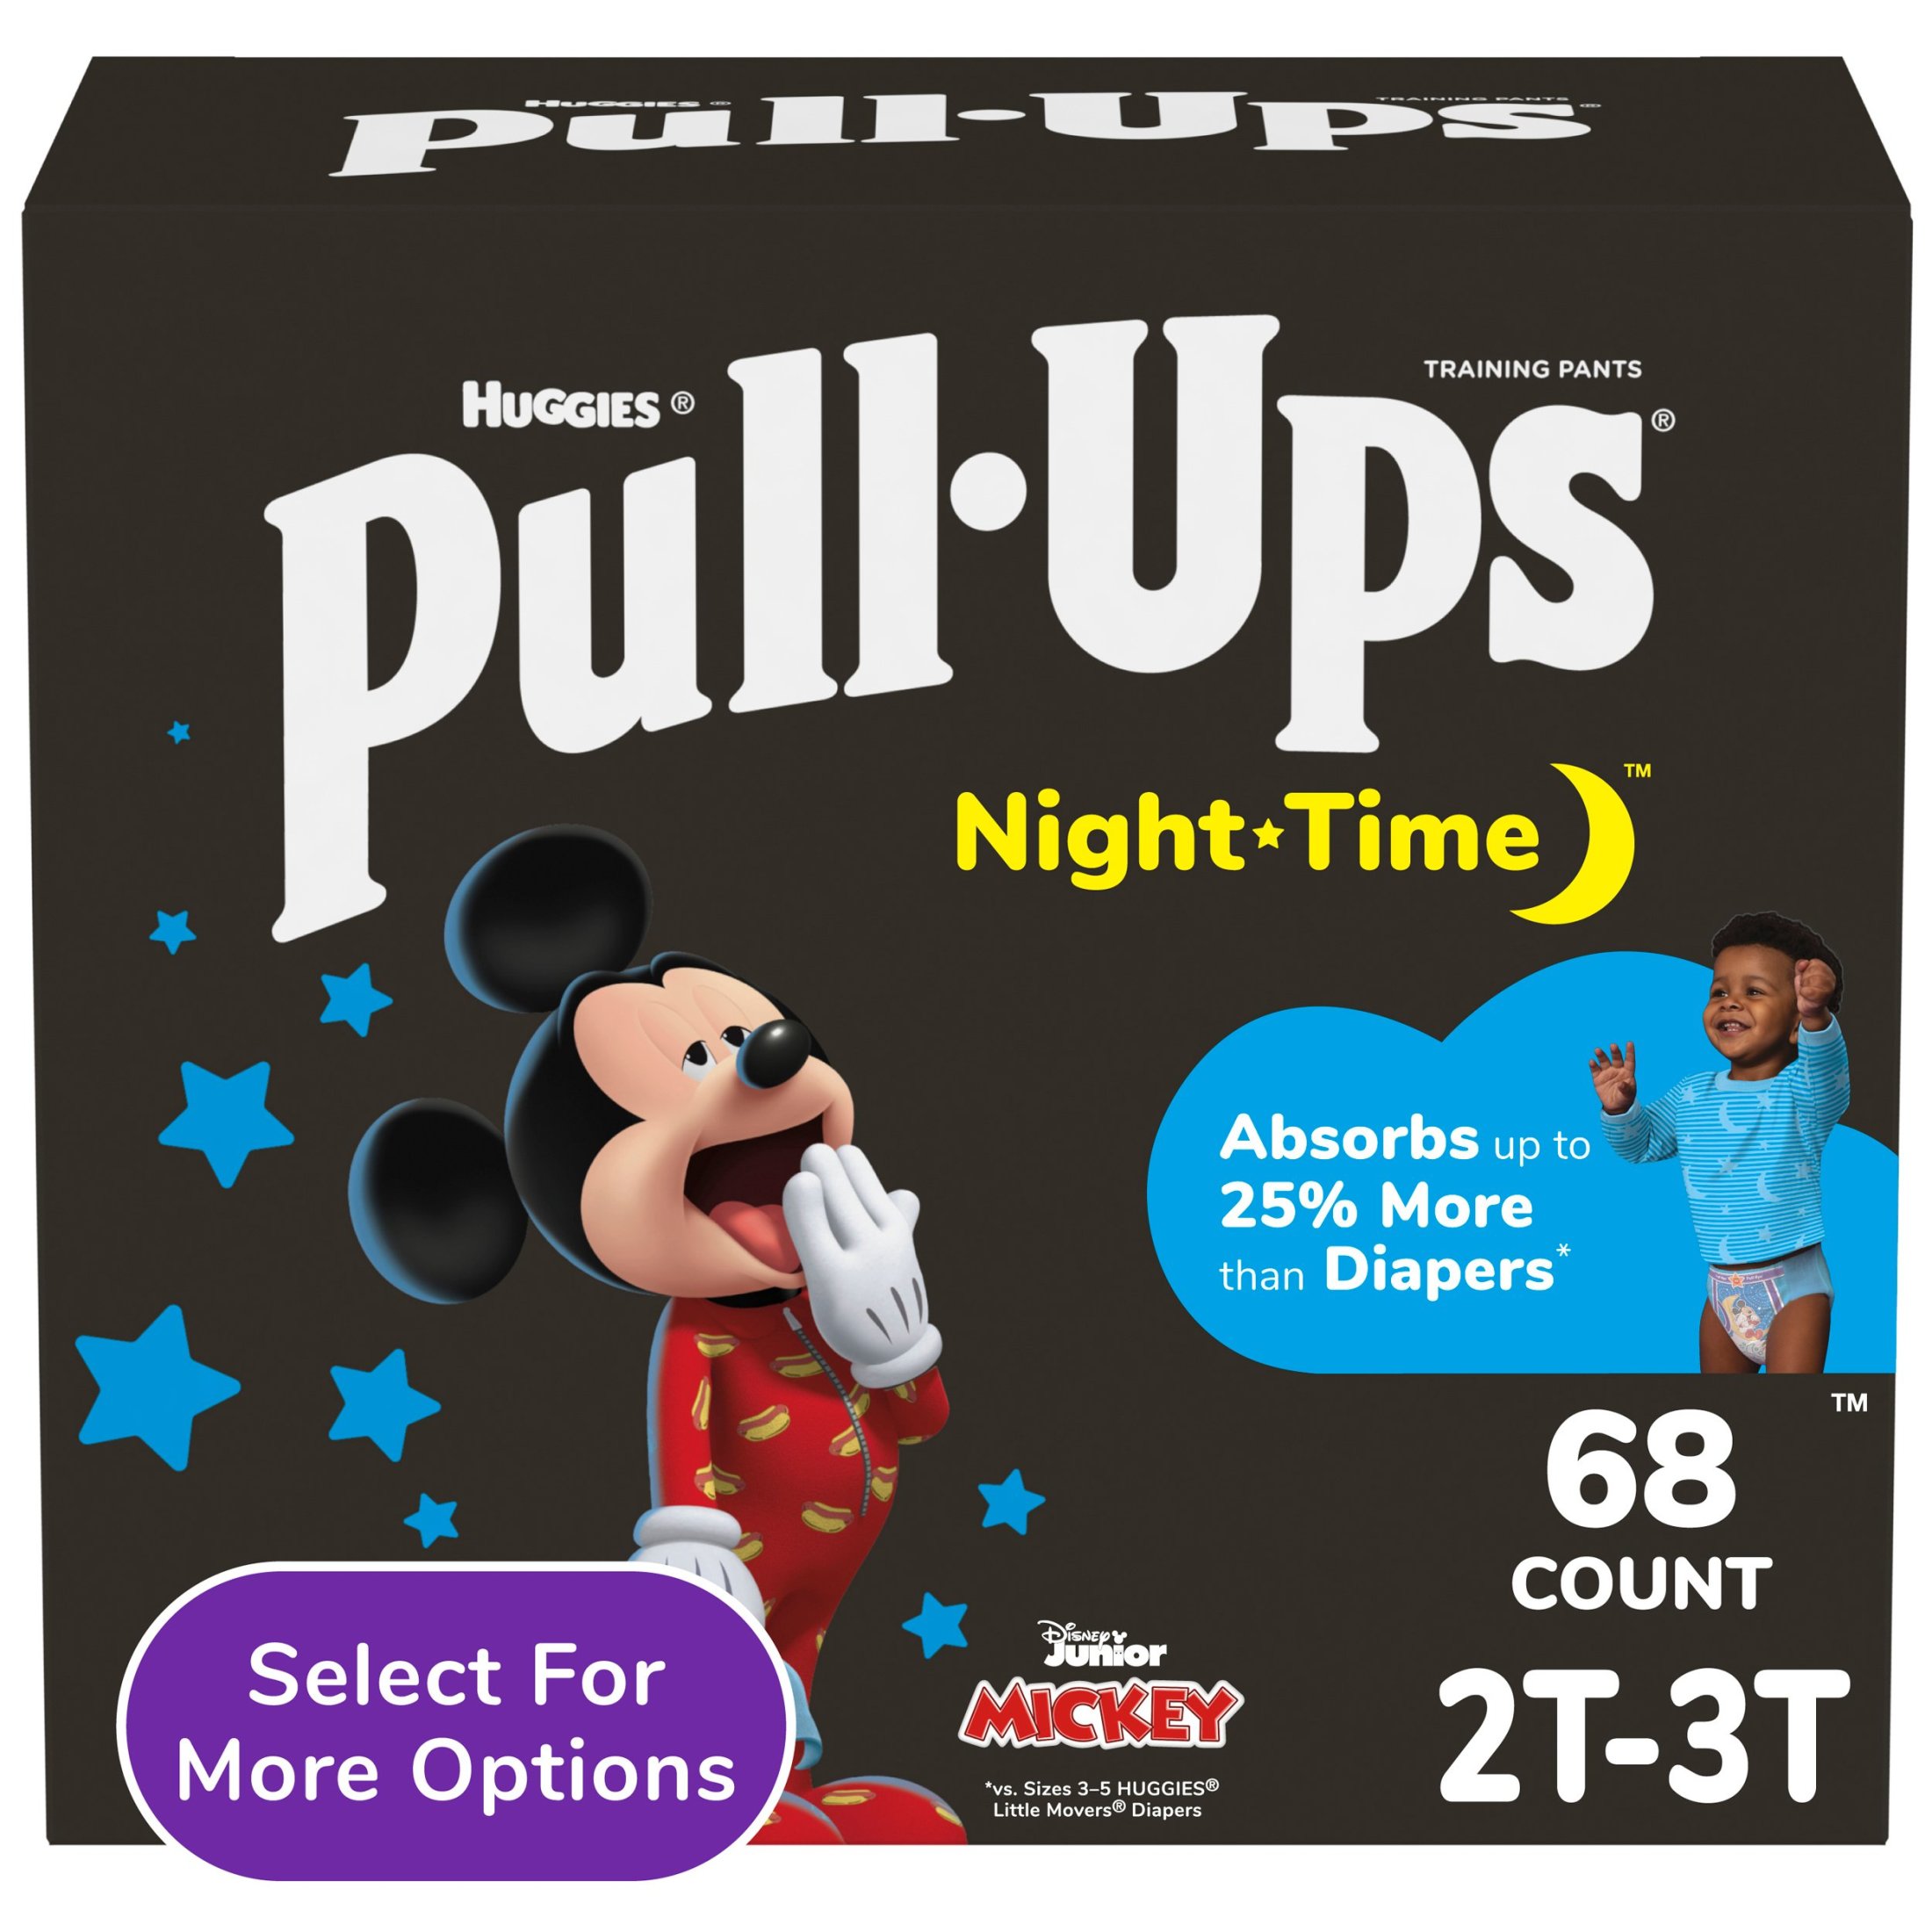 Pull-Ups Boys' Night-Time Training Pants, 2T-3T (16-34 lbs), 68 Ct (Select for More Options) - image 1 of 12